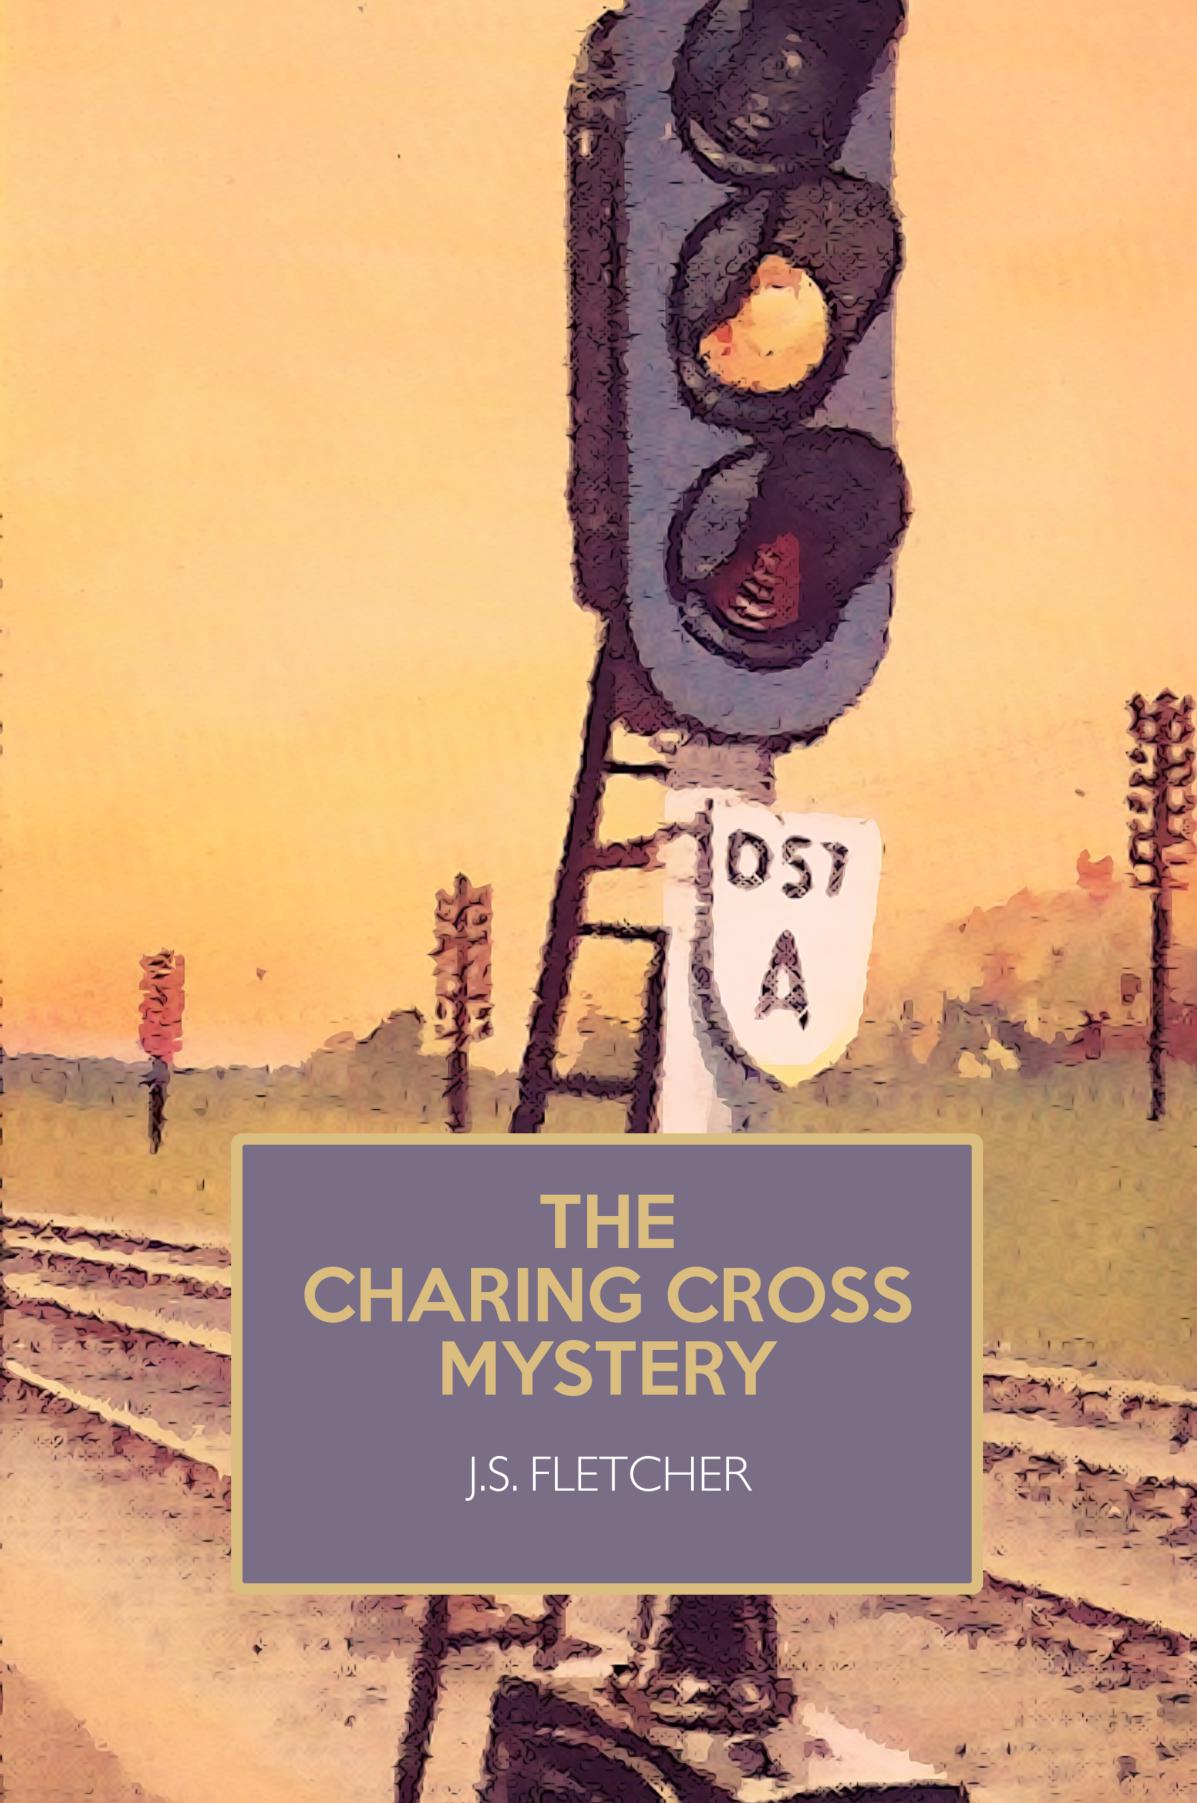 The Charing Cross Mystery